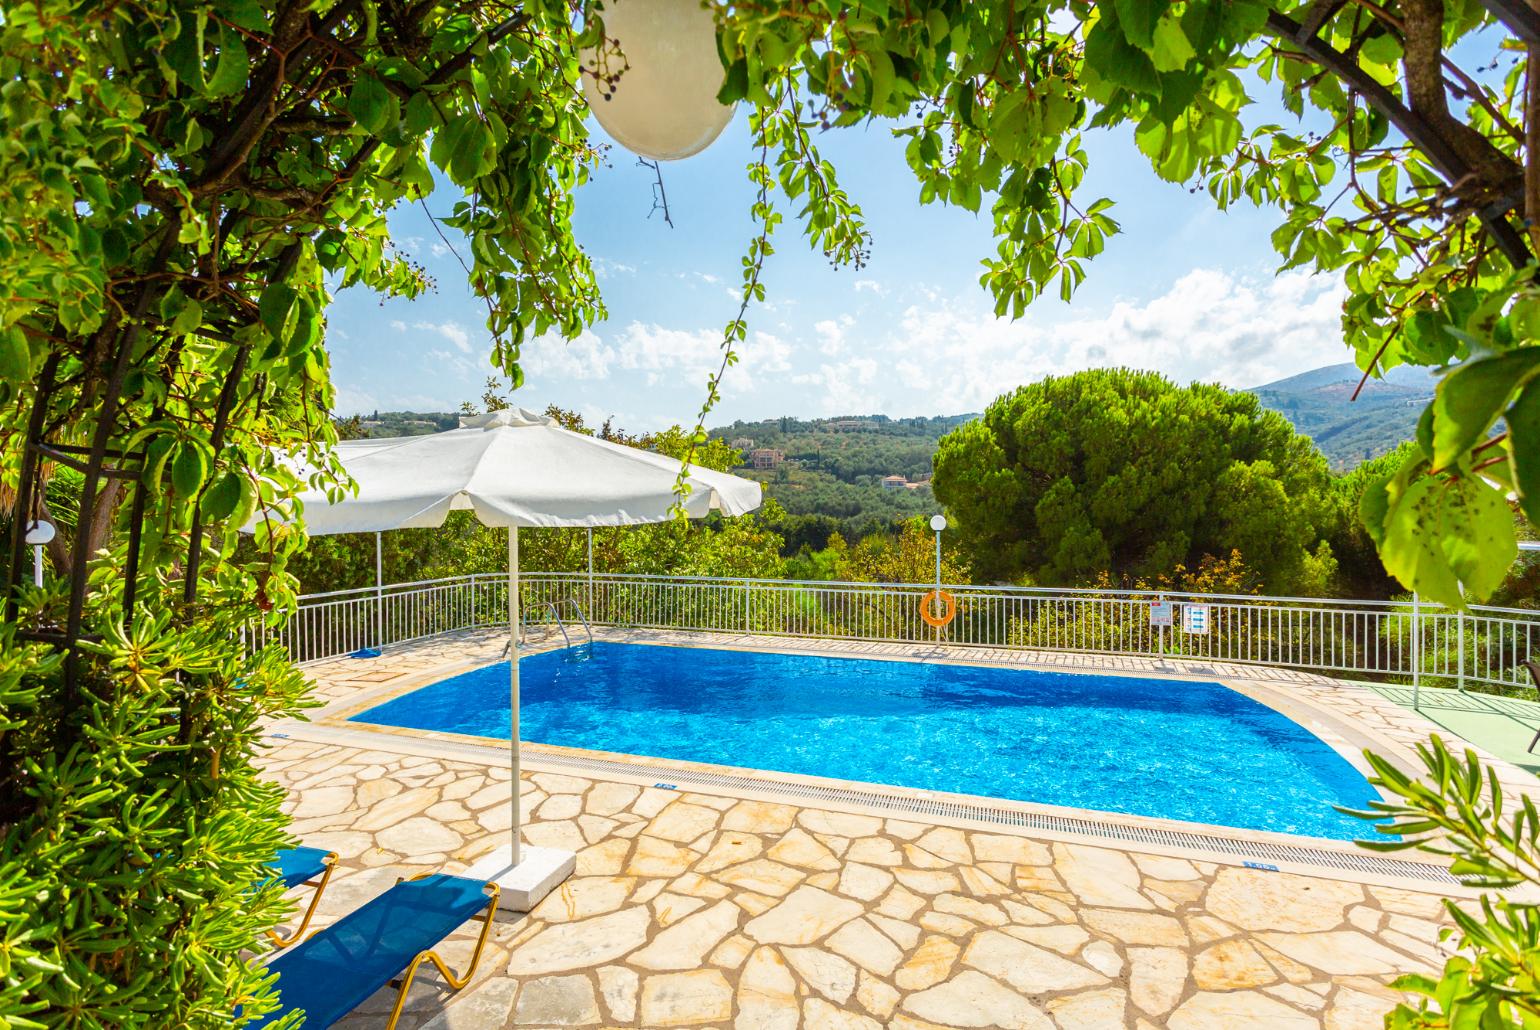 Shared pool, terrace, and garden with countryside views